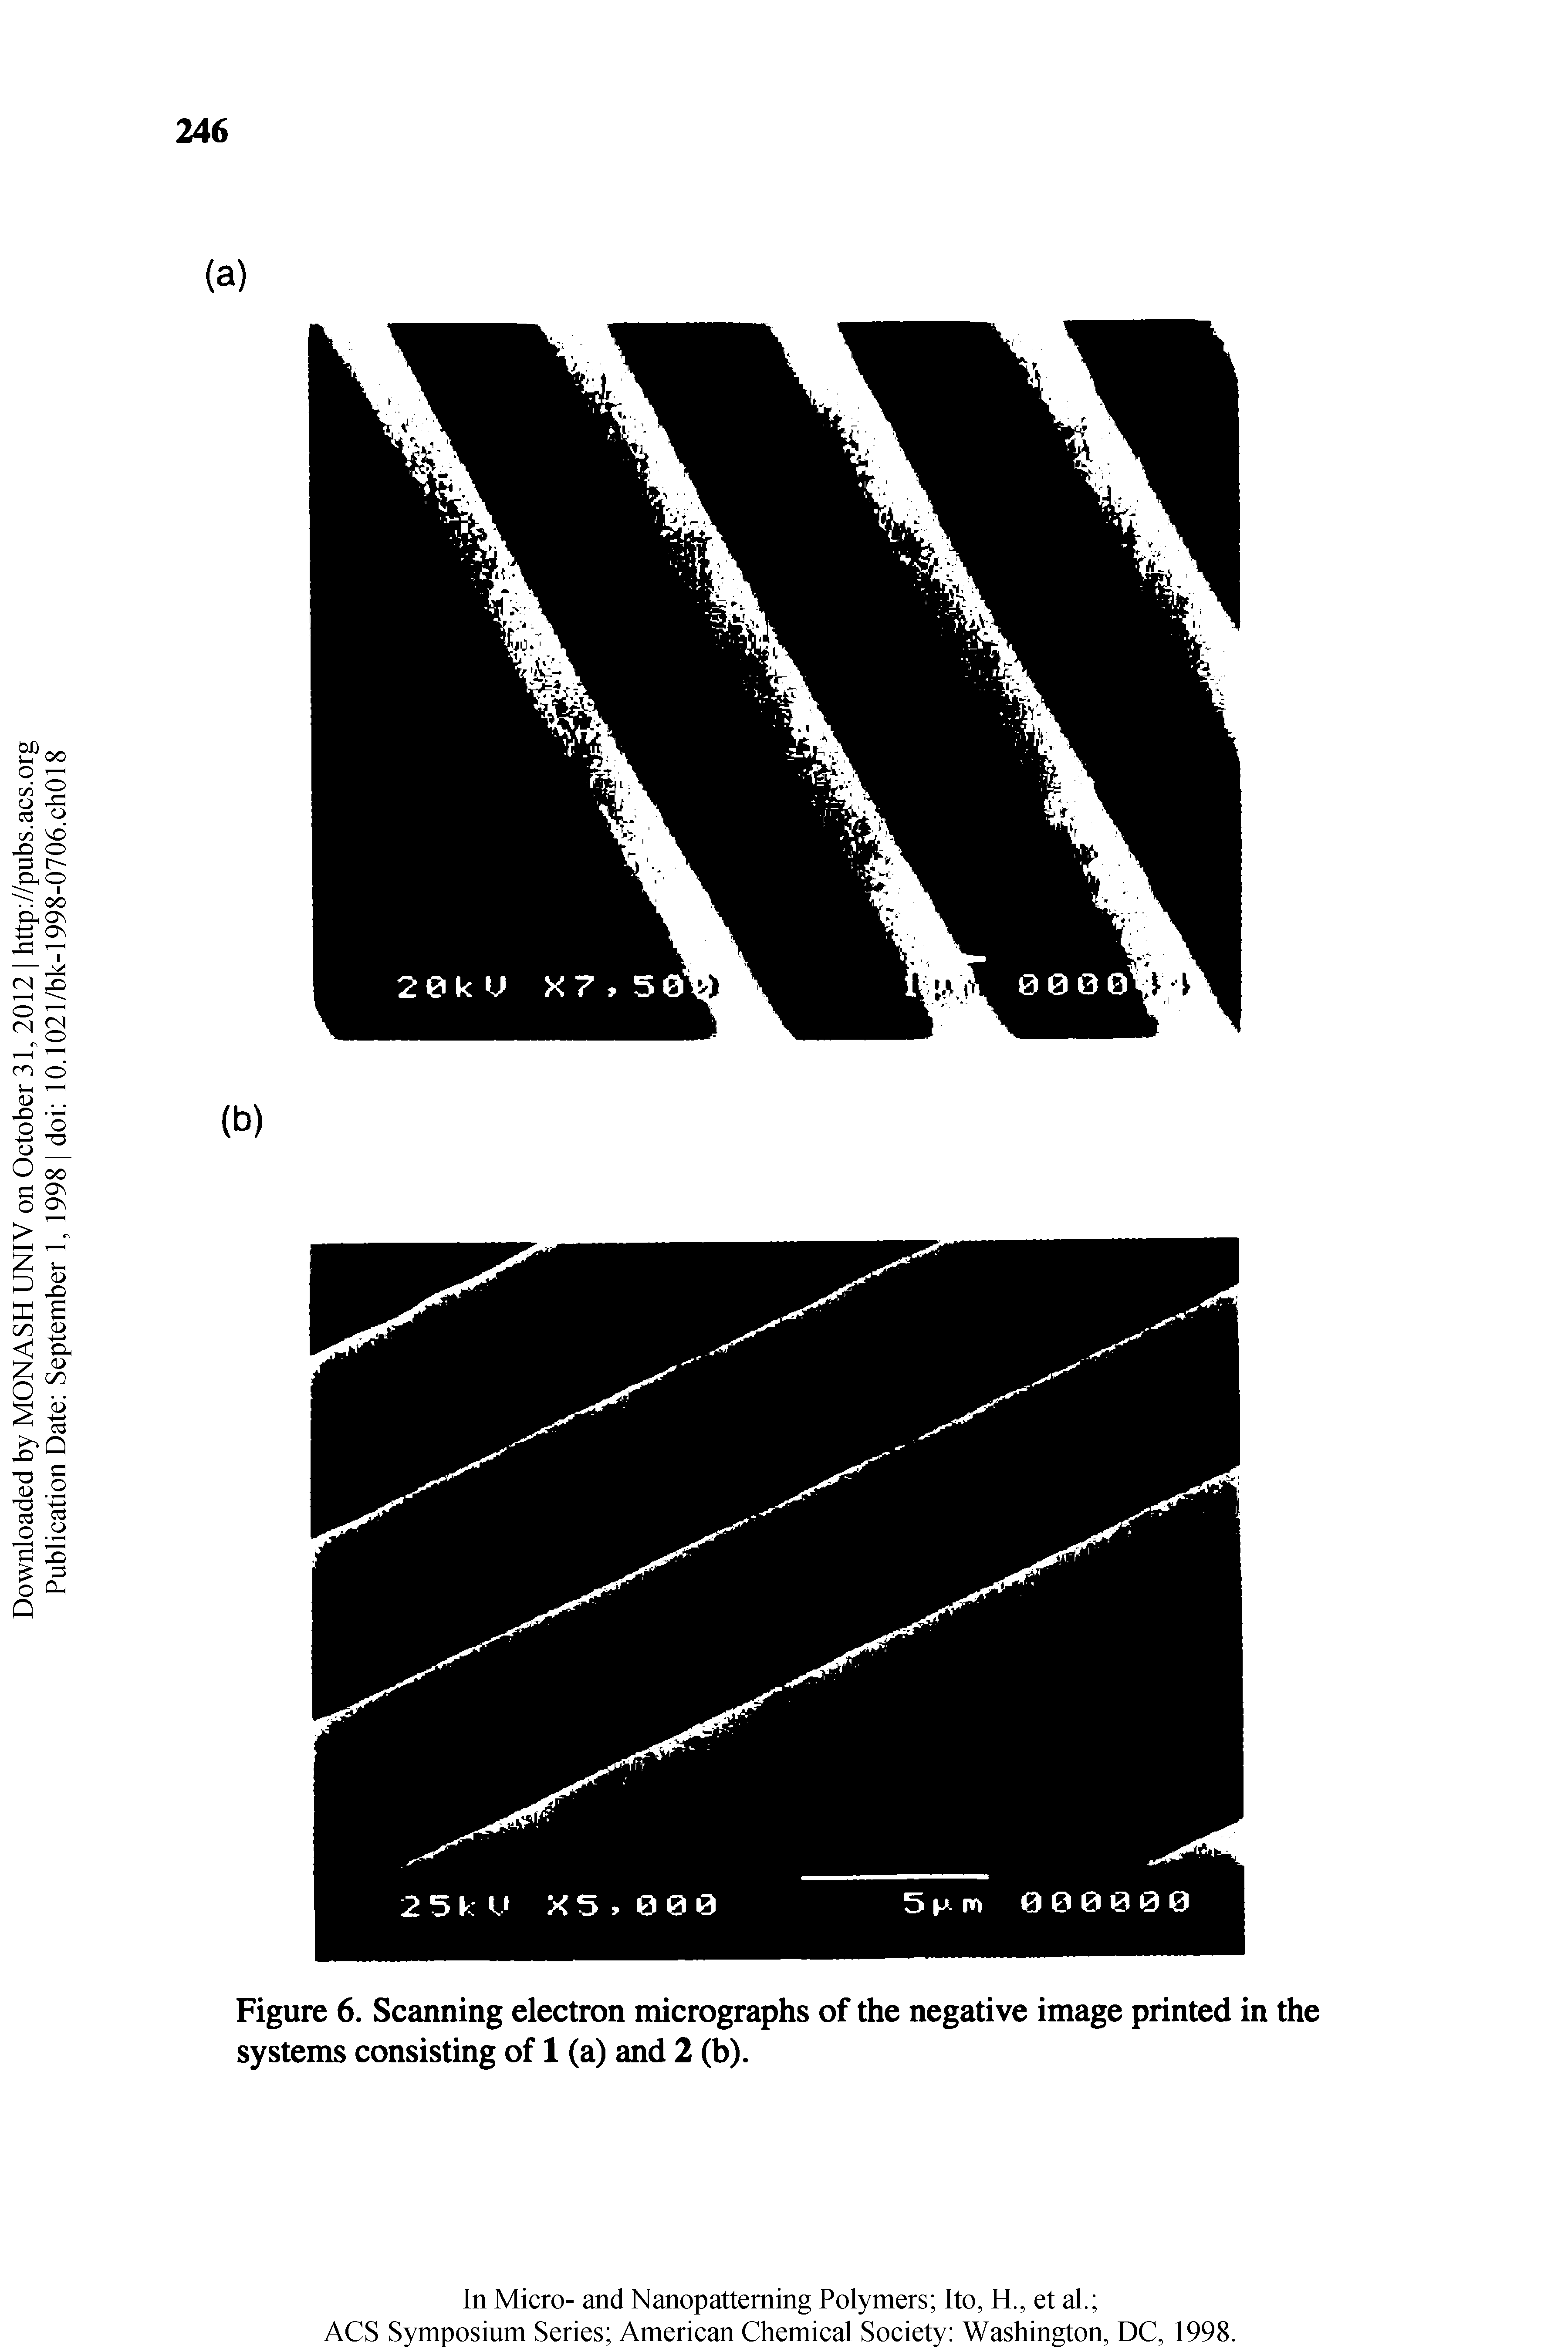 Figure 6. Scanning electron micrographs of the negative image printed in the systems consisting of 1 (a) and 2 (b).